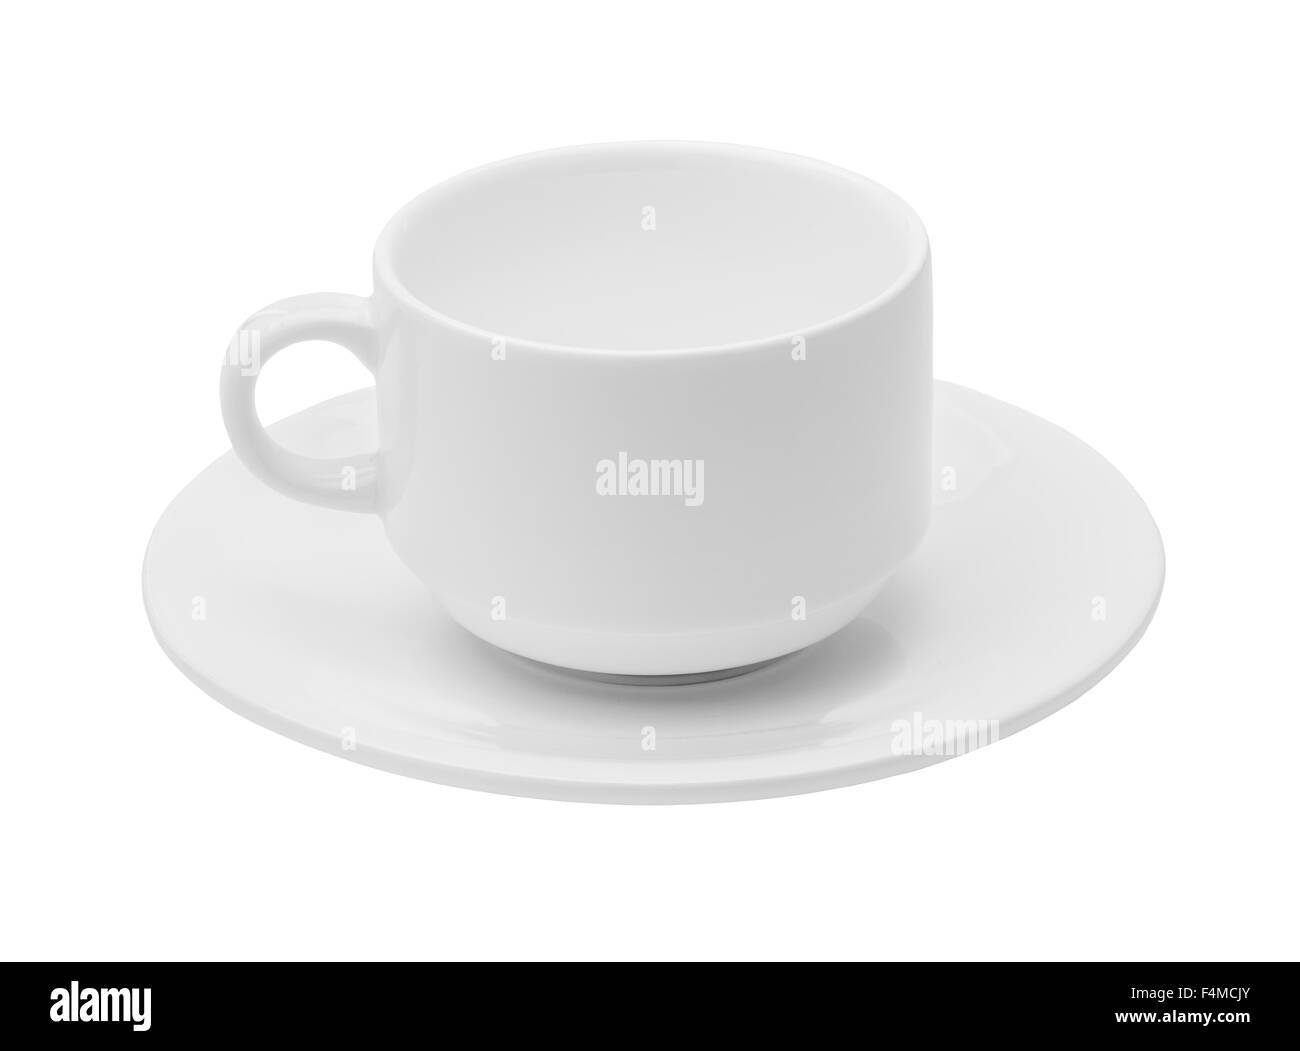 https://c8.alamy.com/comp/F4MCJY/empty-white-ceramic-coffee-or-tea-cup-and-saucer-isolated-on-a-white-F4MCJY.jpg